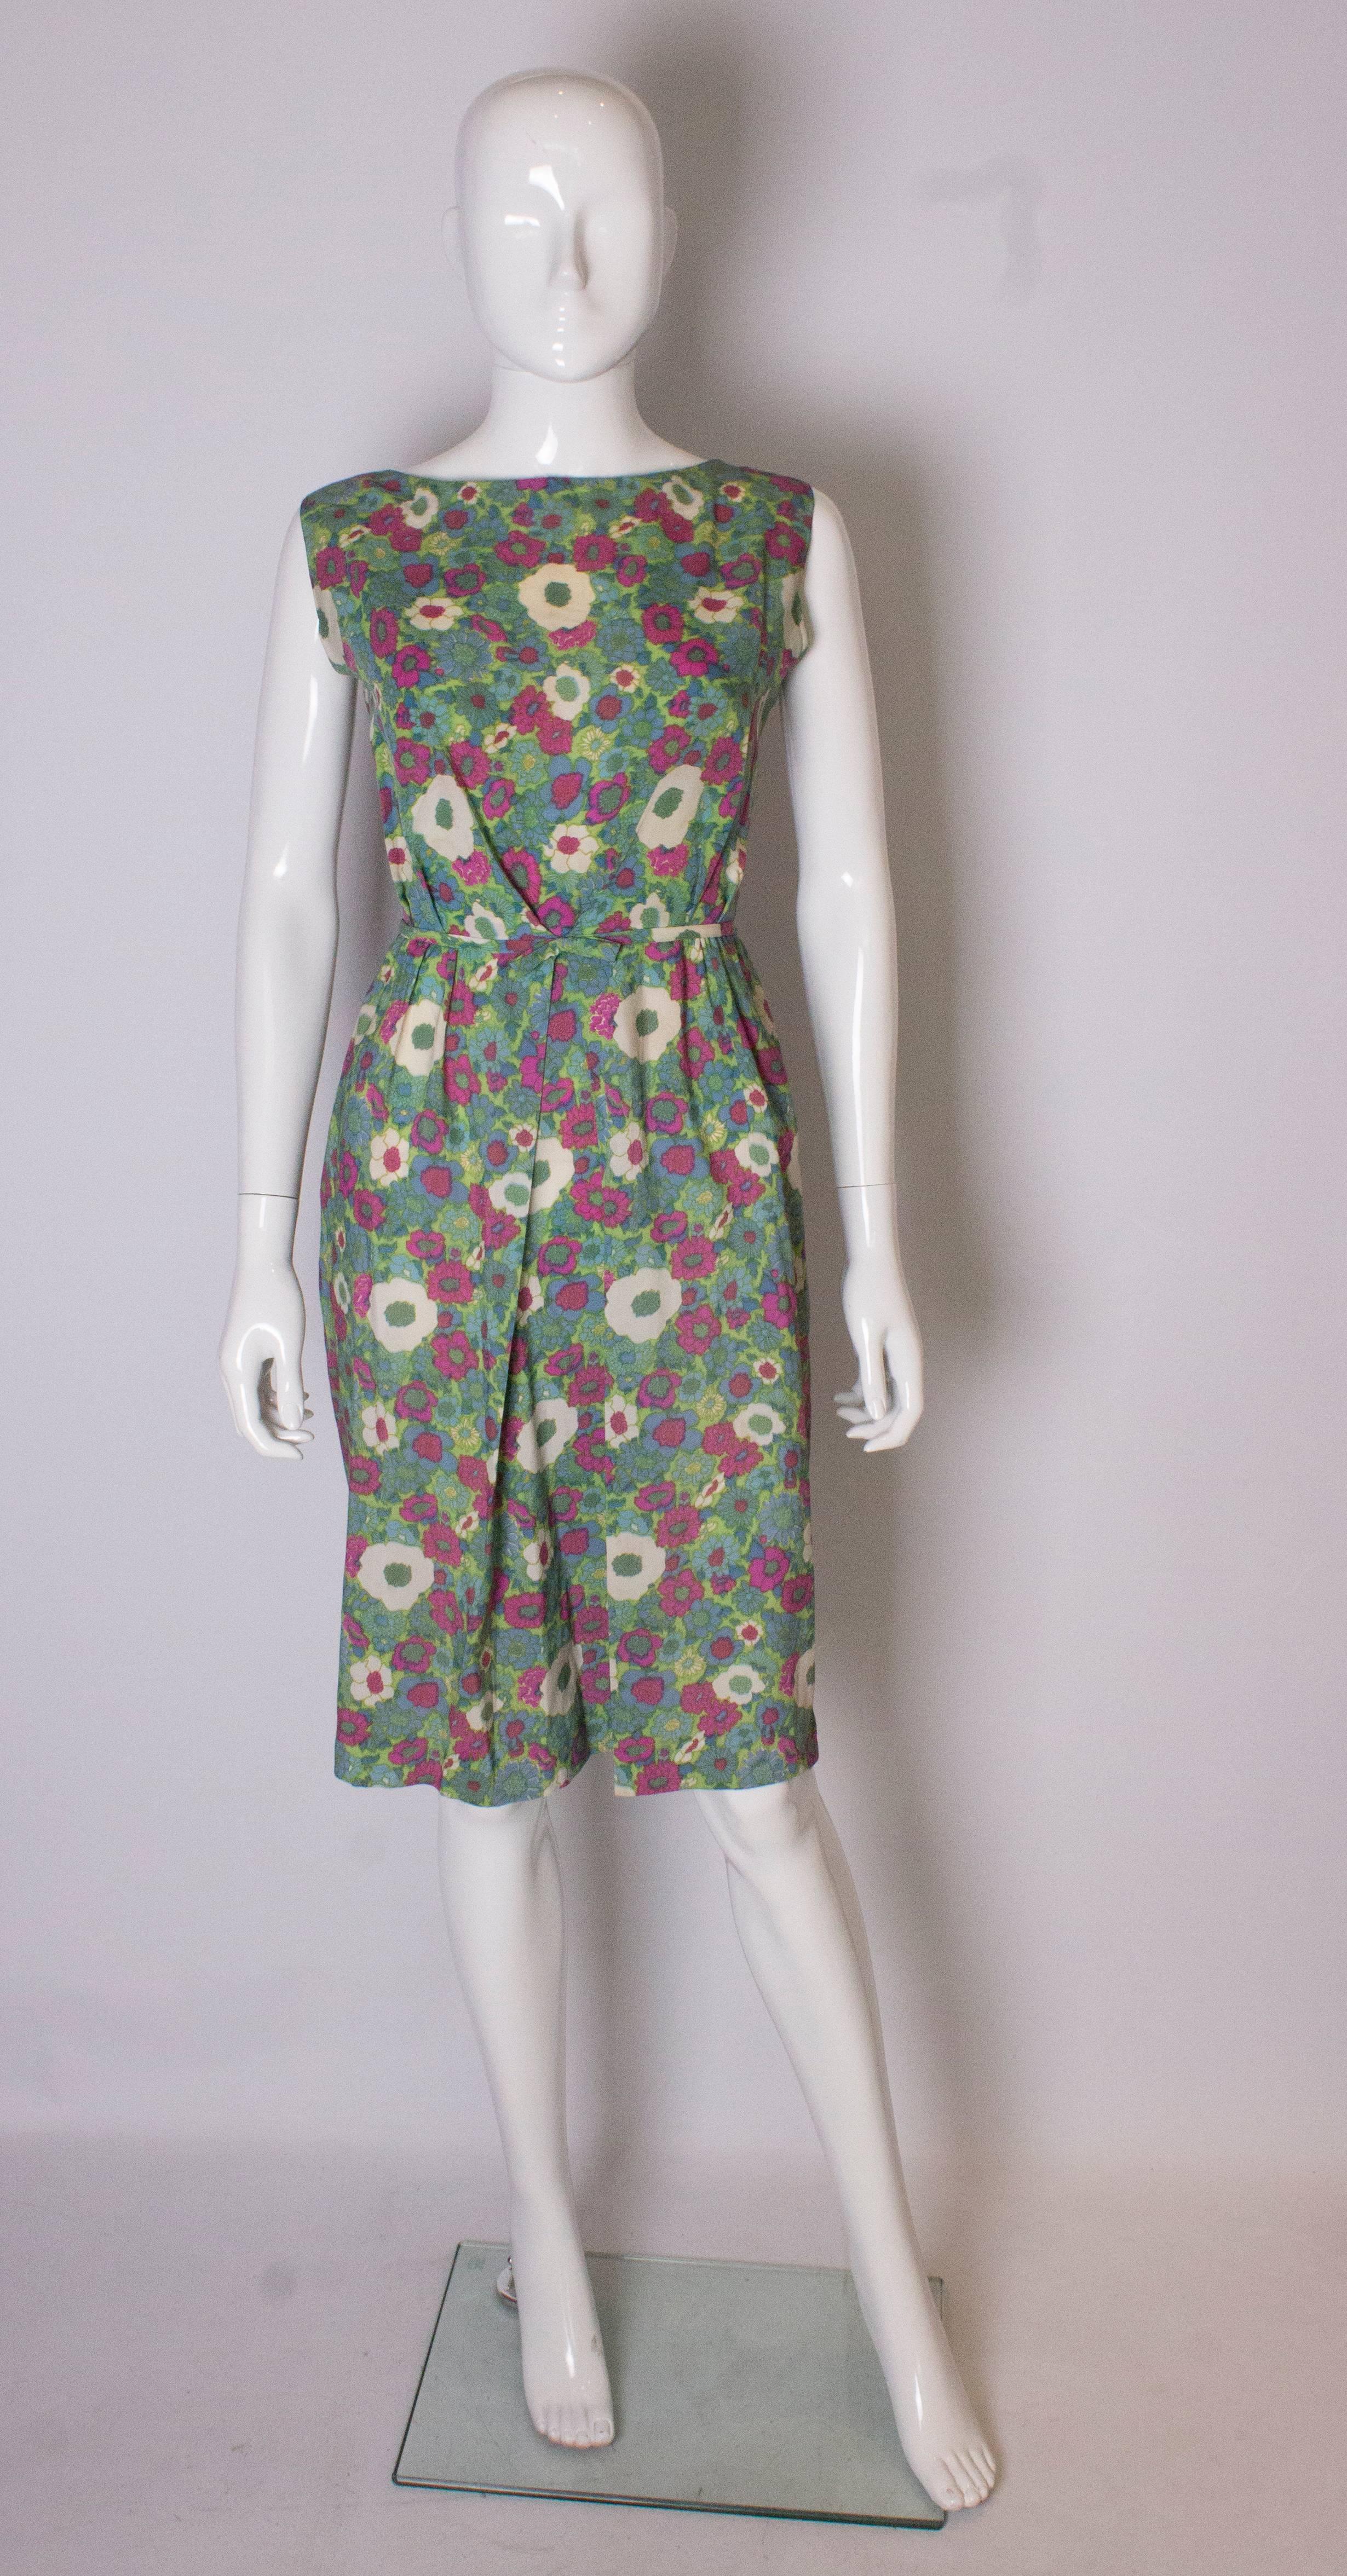 A pretty vintage dress for Spring/Summer, in a green, burgundy, blue and cream floral print. The dress has a pleat and gathering at the front with a  bow. It opens at the back with 5 buttons and 3 poppers.